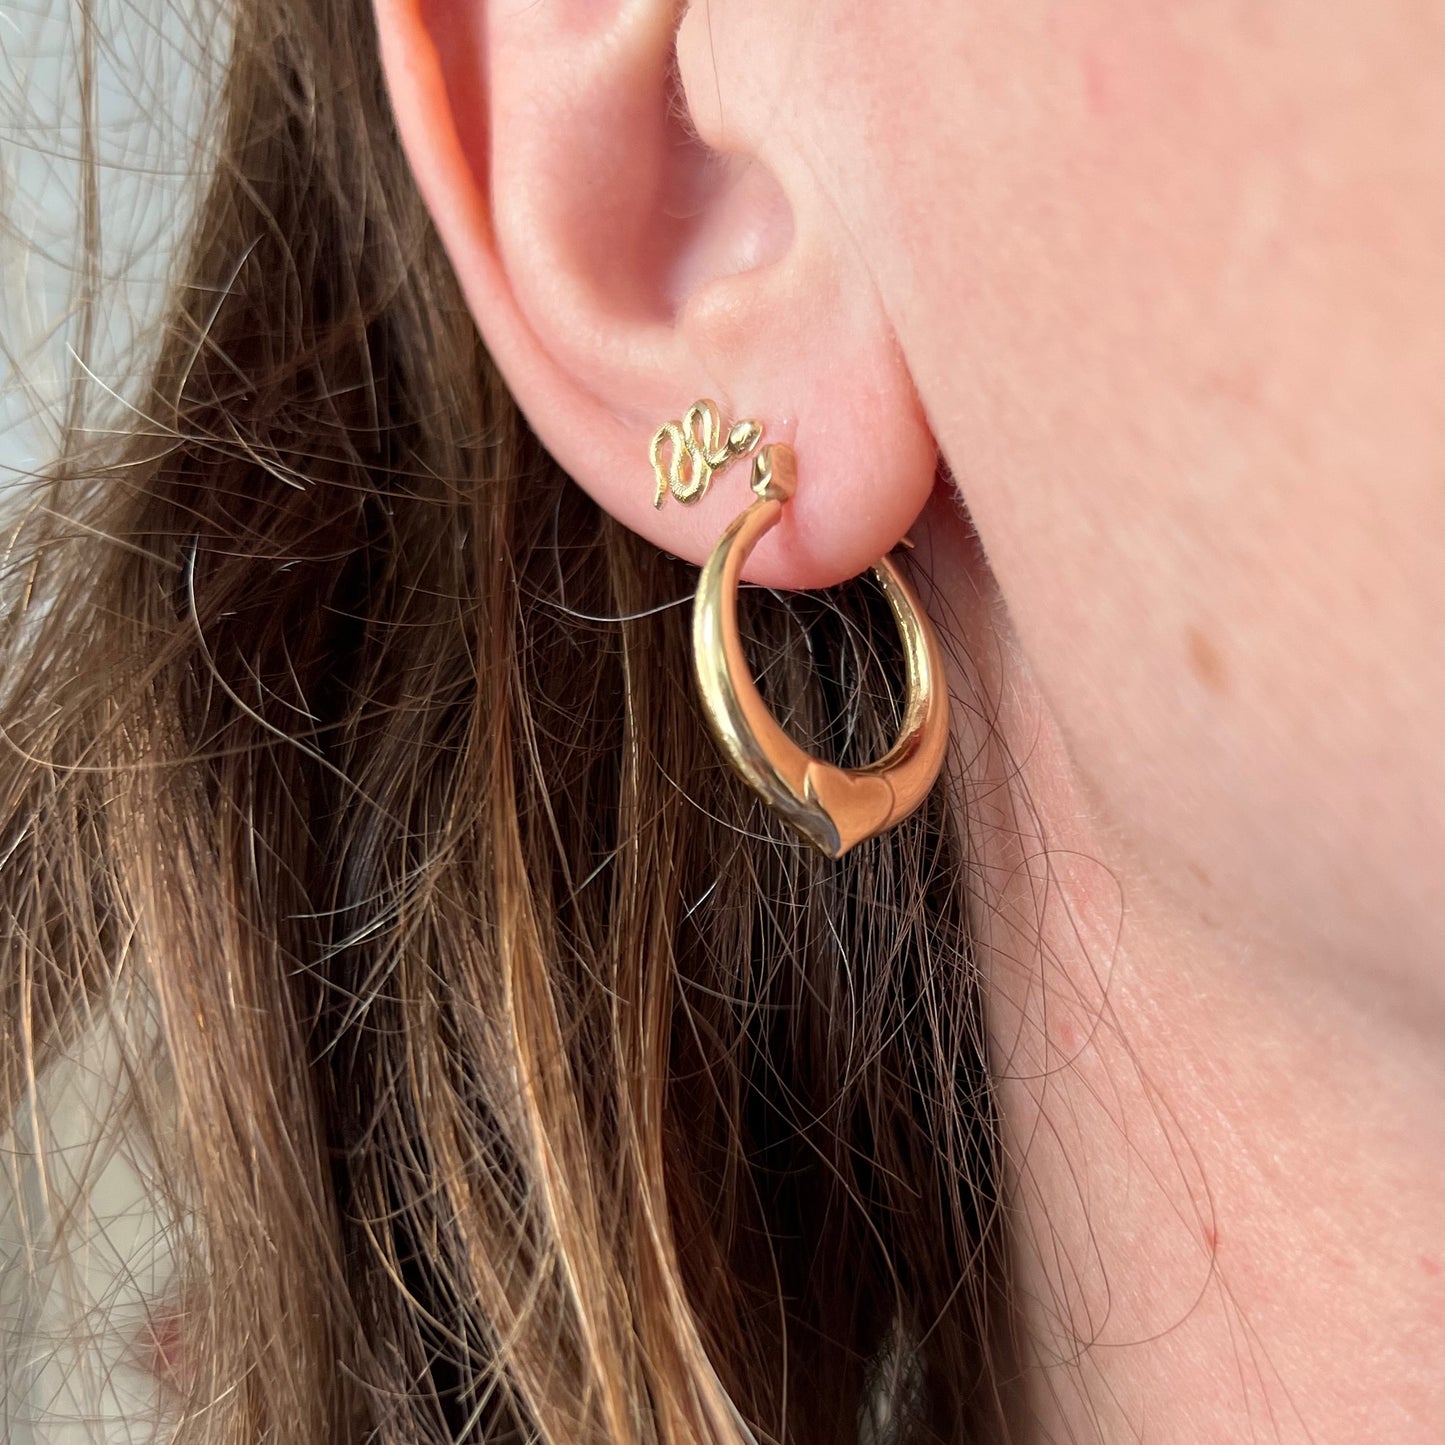 V I N T A G E // suspended love / 14k yellow gold with hearts / hoop earrings